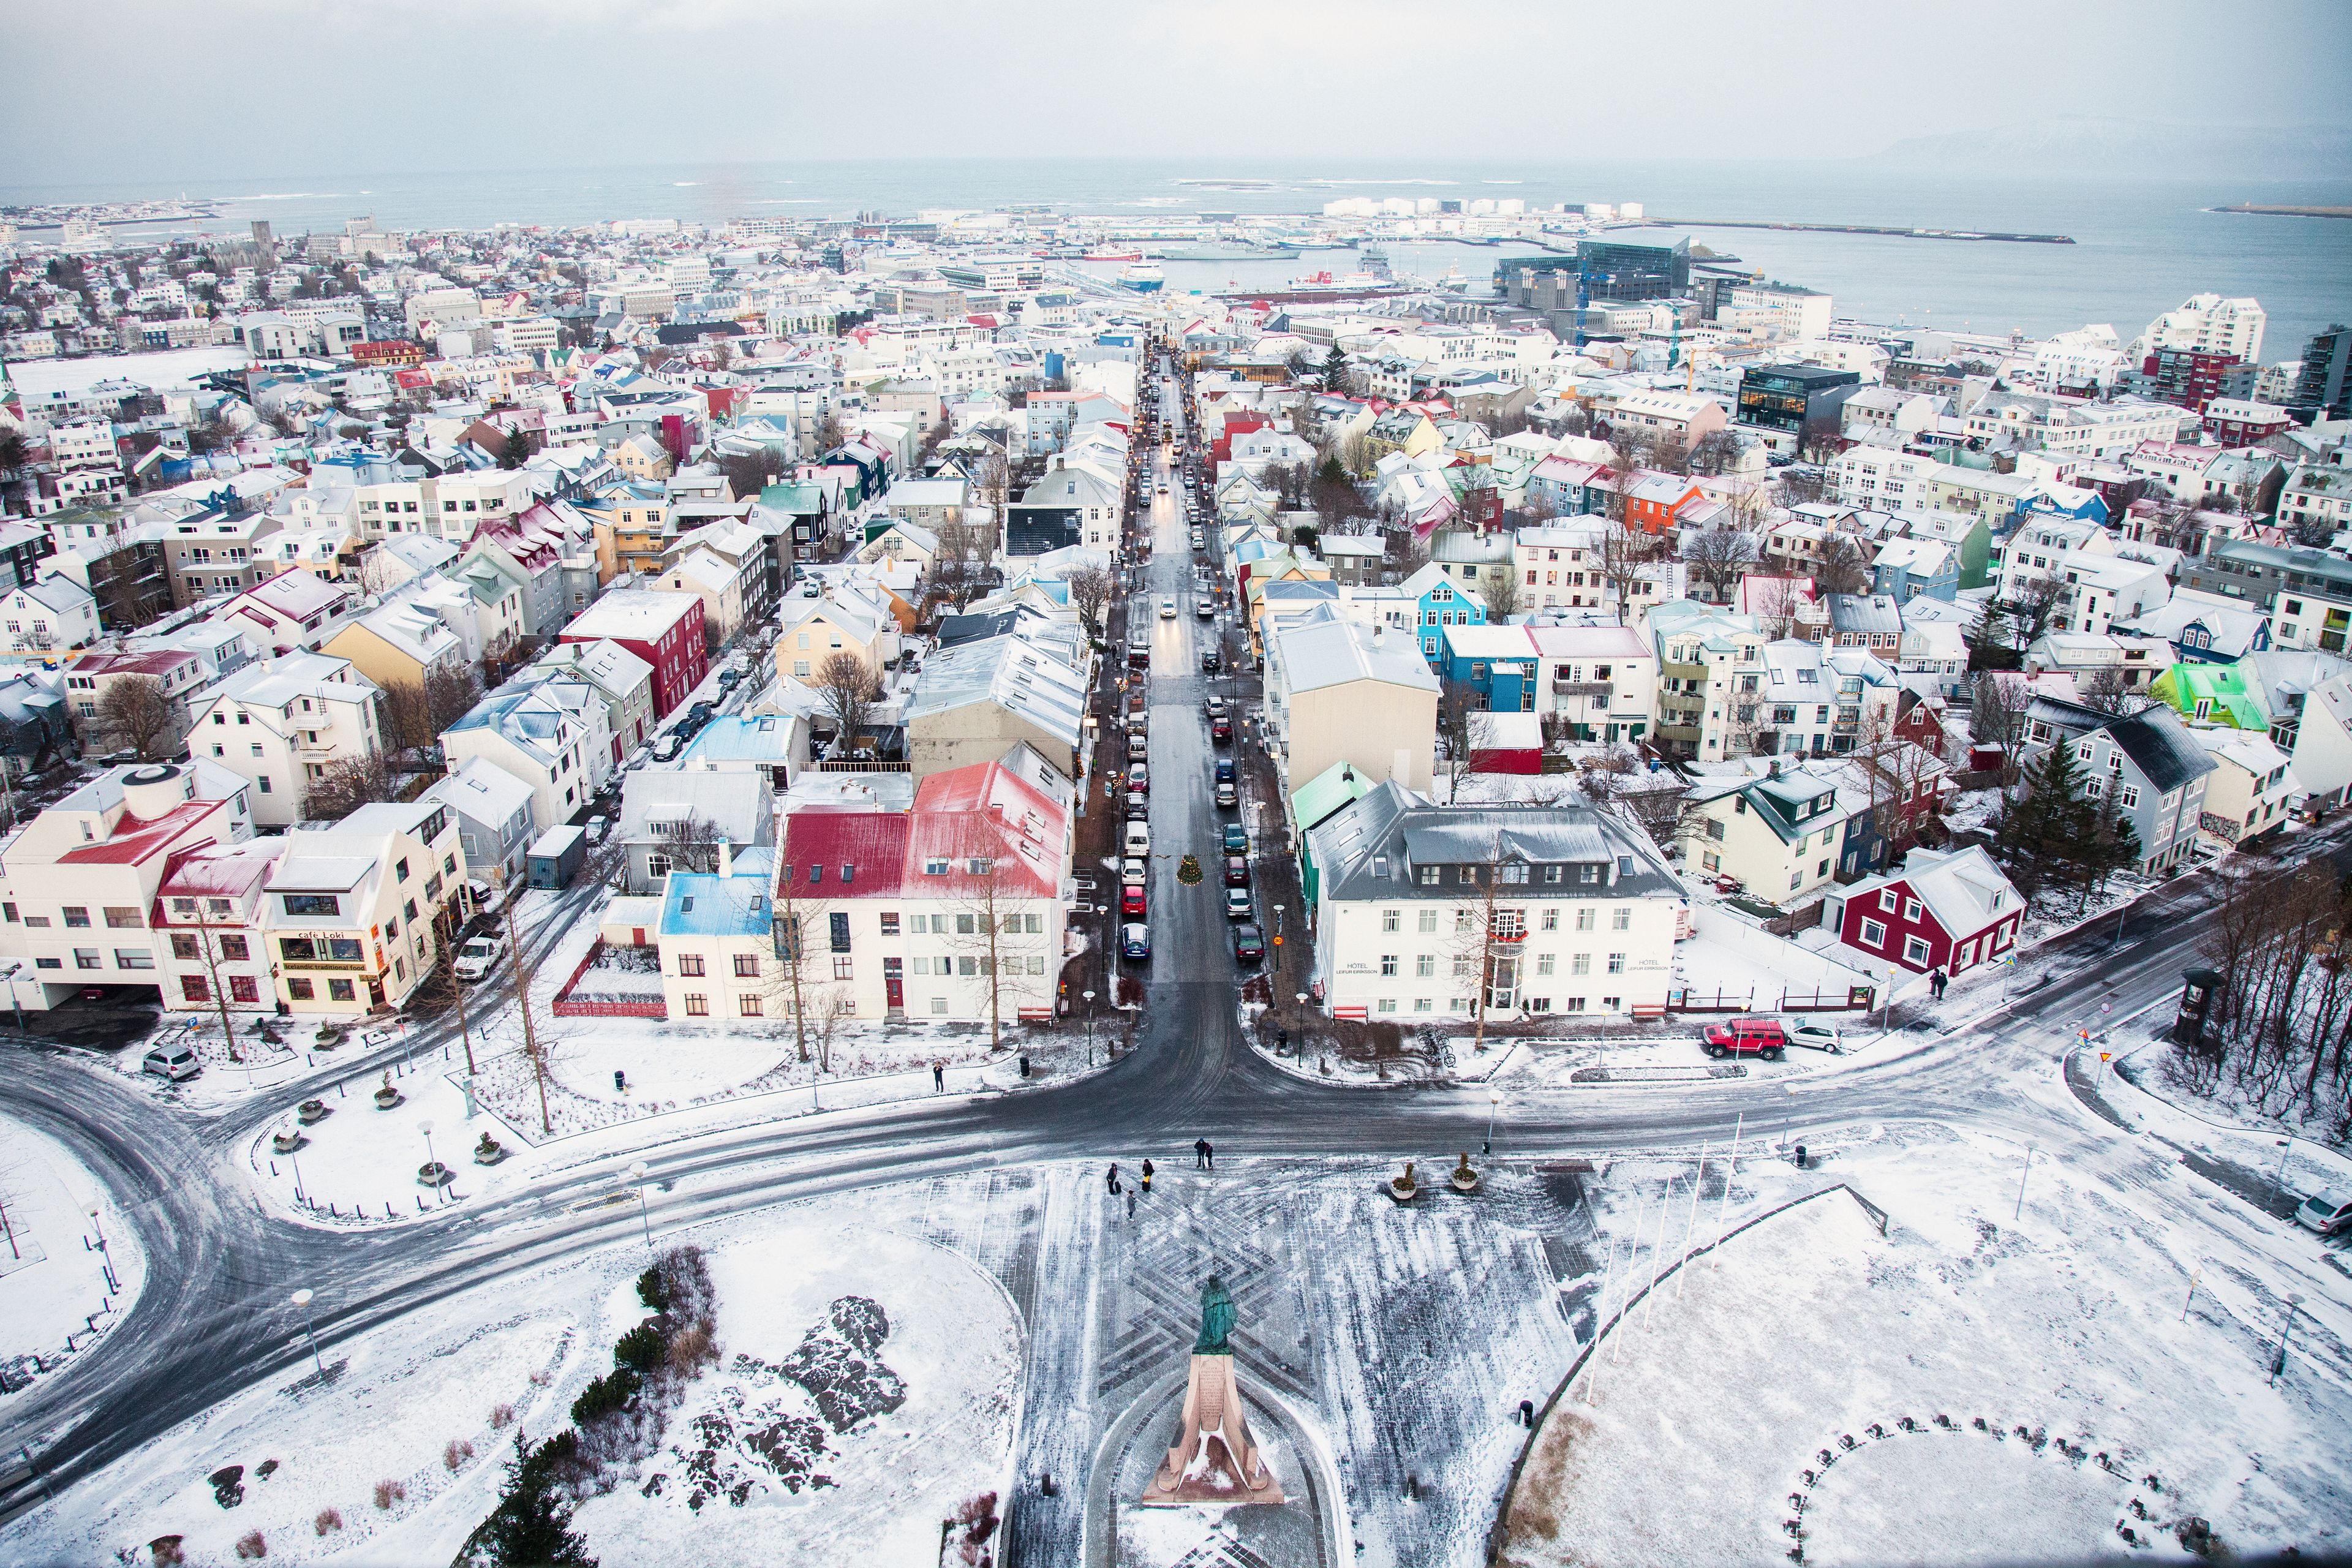 Iceland in December: A view of Reykjavik during winter season with snow